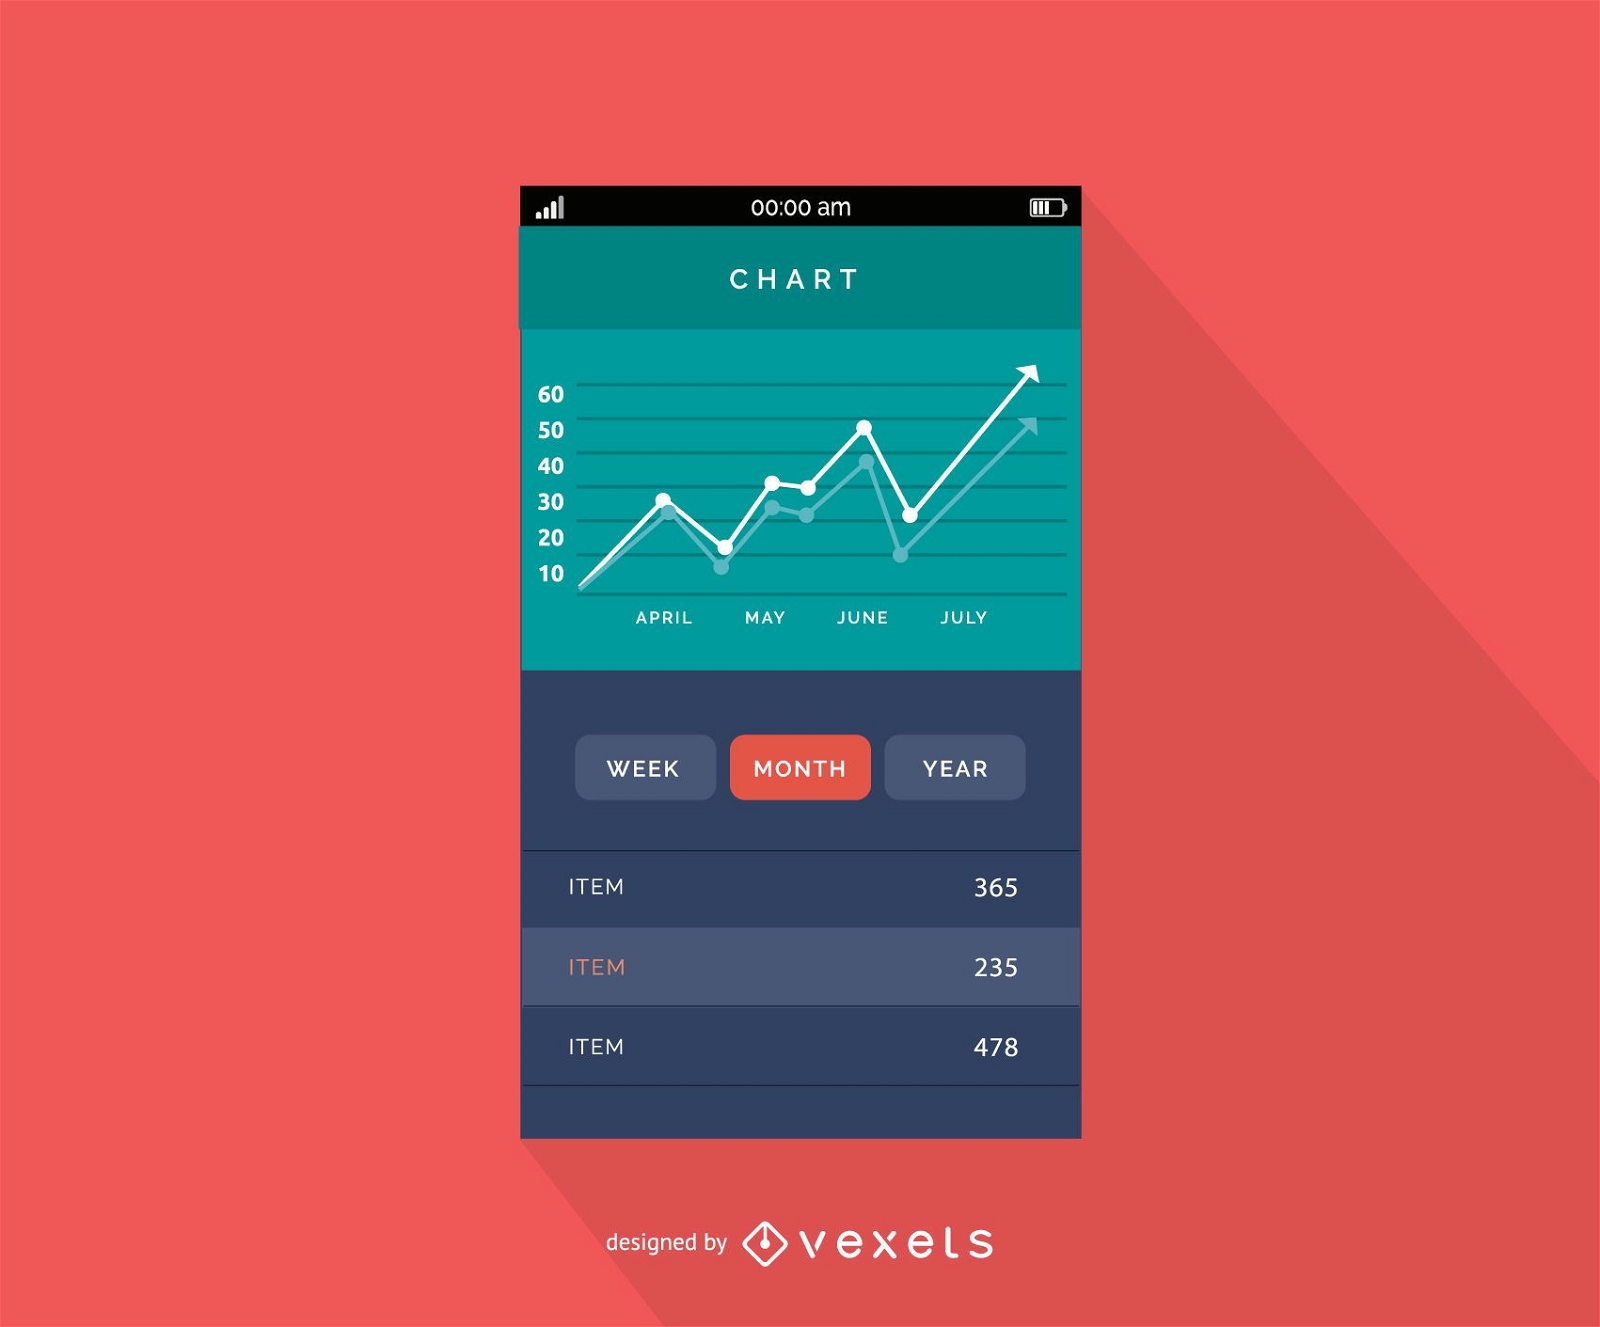 Mobile chart interface design